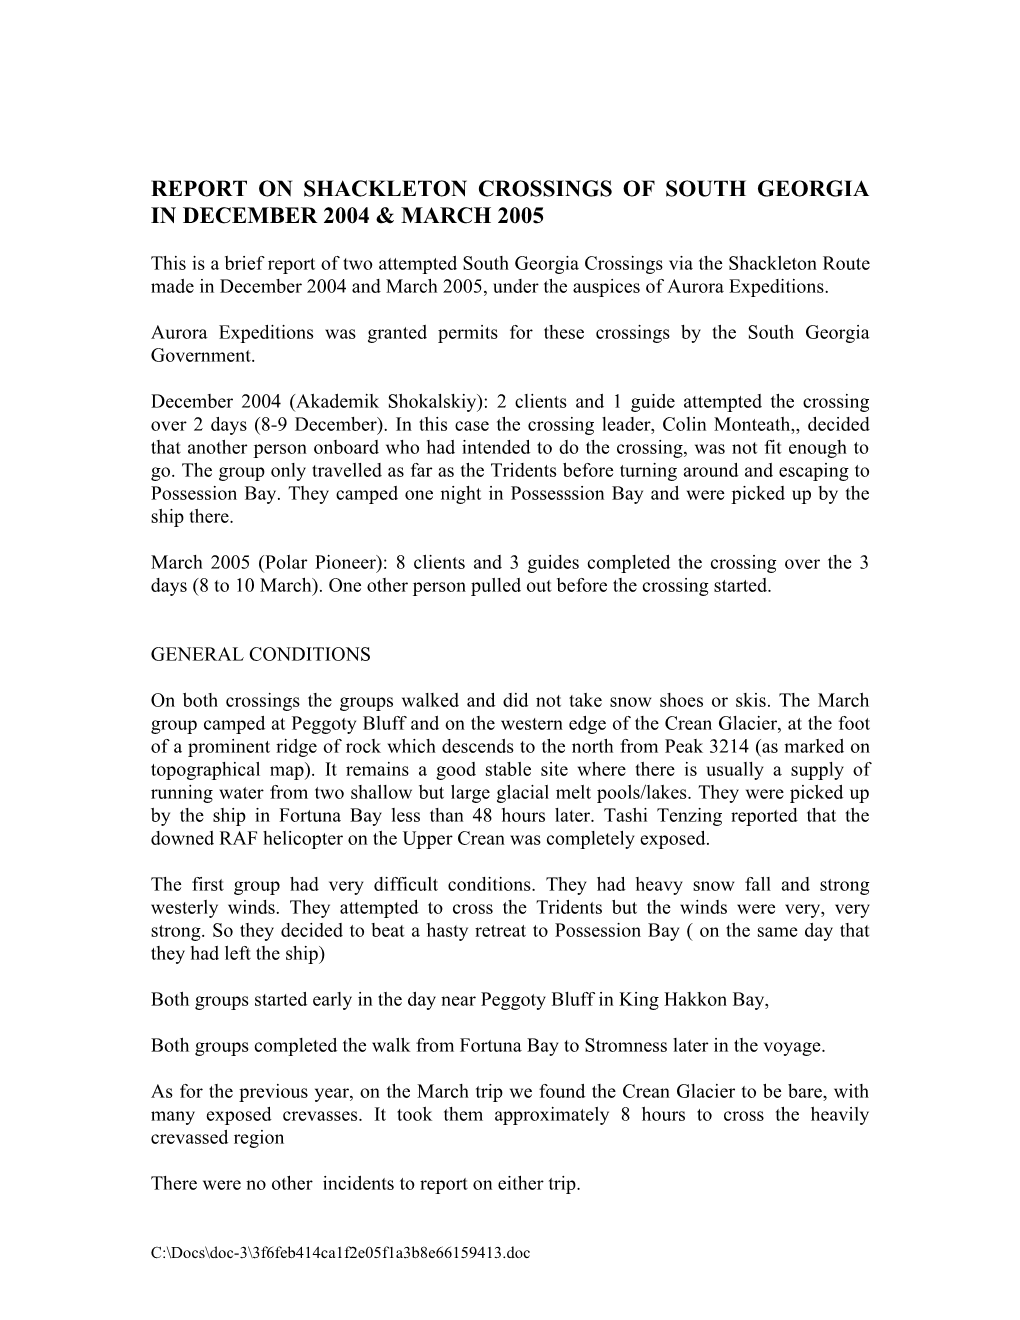 Report on Shackleton Crossing of South Georgia in November 2002